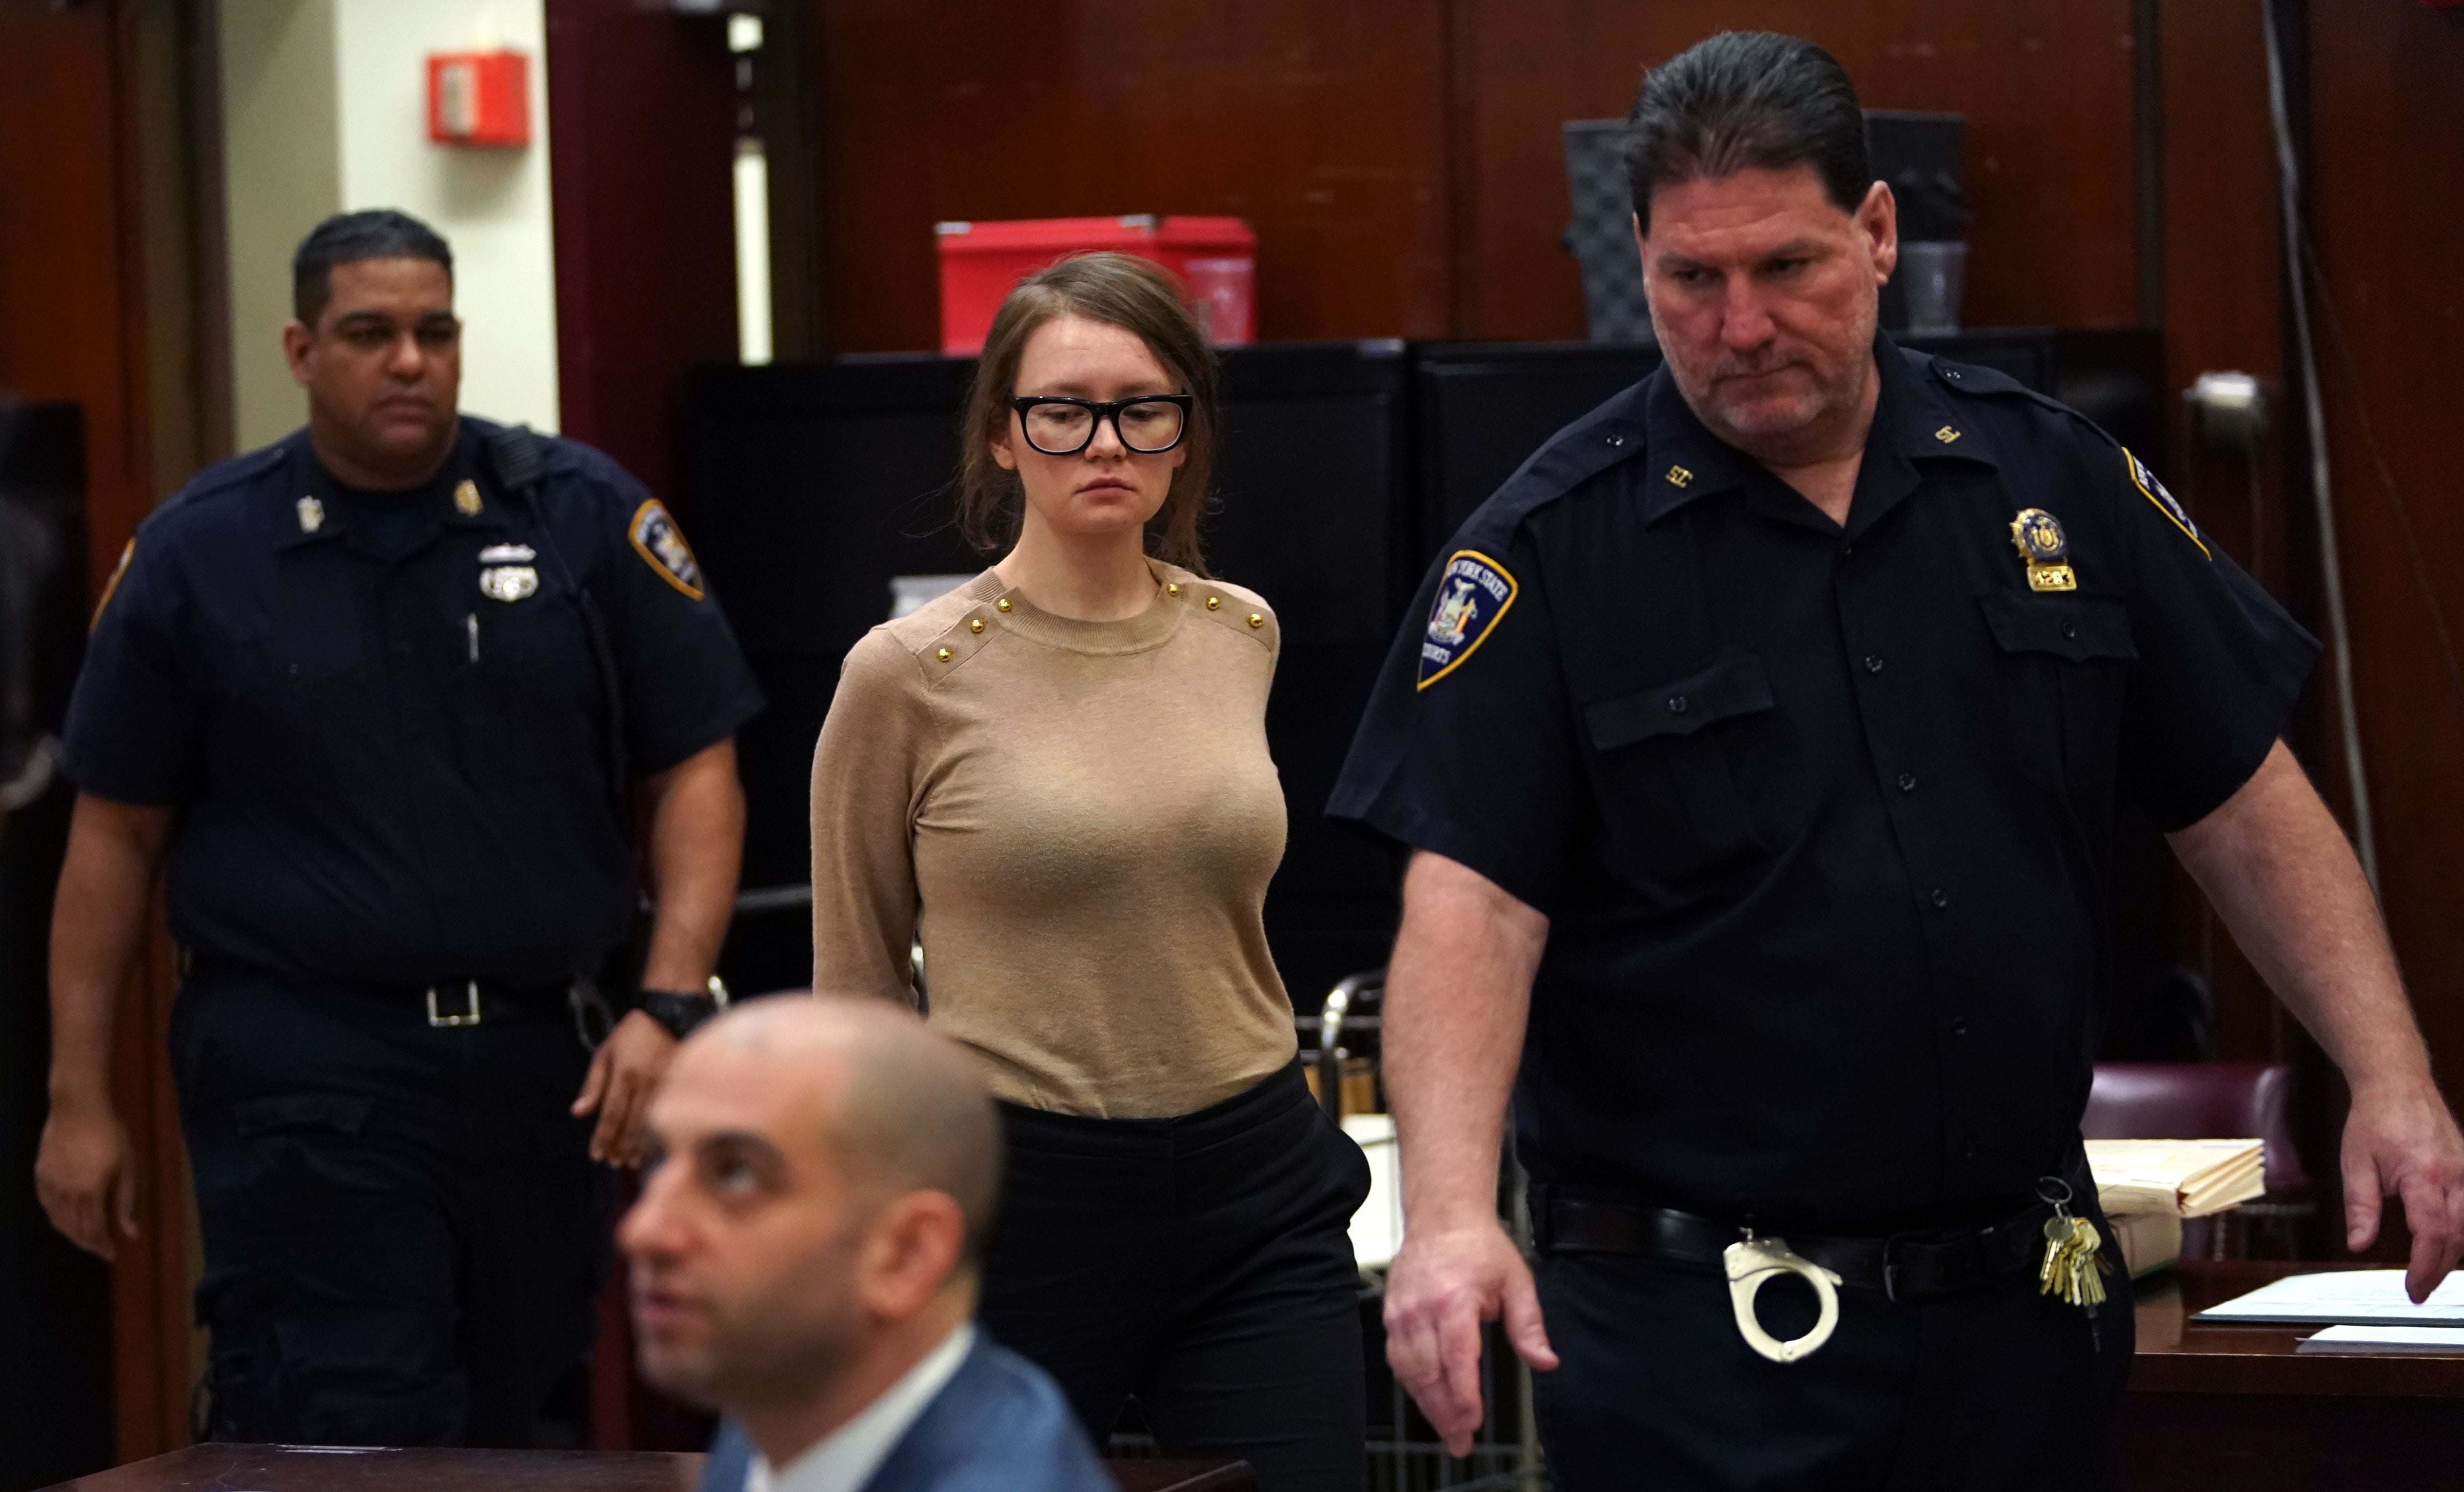 Anna Sorokin better known as Anna Delvey, the 28-year-old German national, whose family moved there in 2007 from Russia, is seen in the courtroom during her trial at New York State Supreme Court in New York on April 11, 2019.